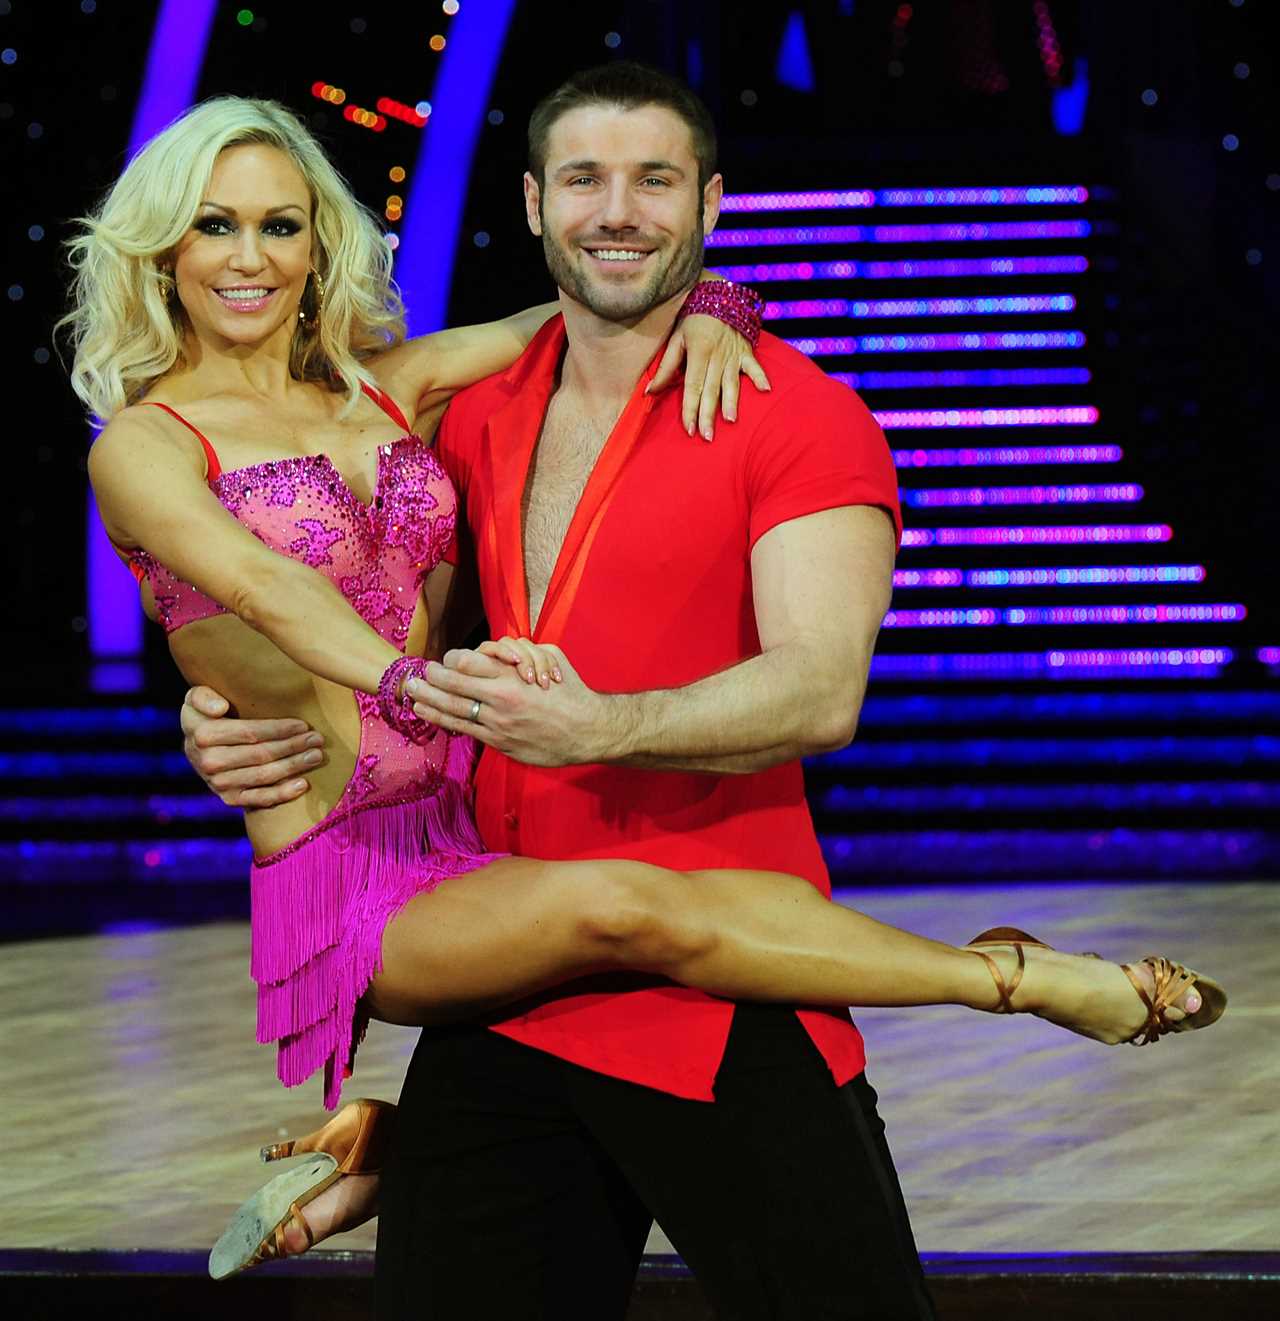 Ben and Kristina were paired together at Strictly in 2013